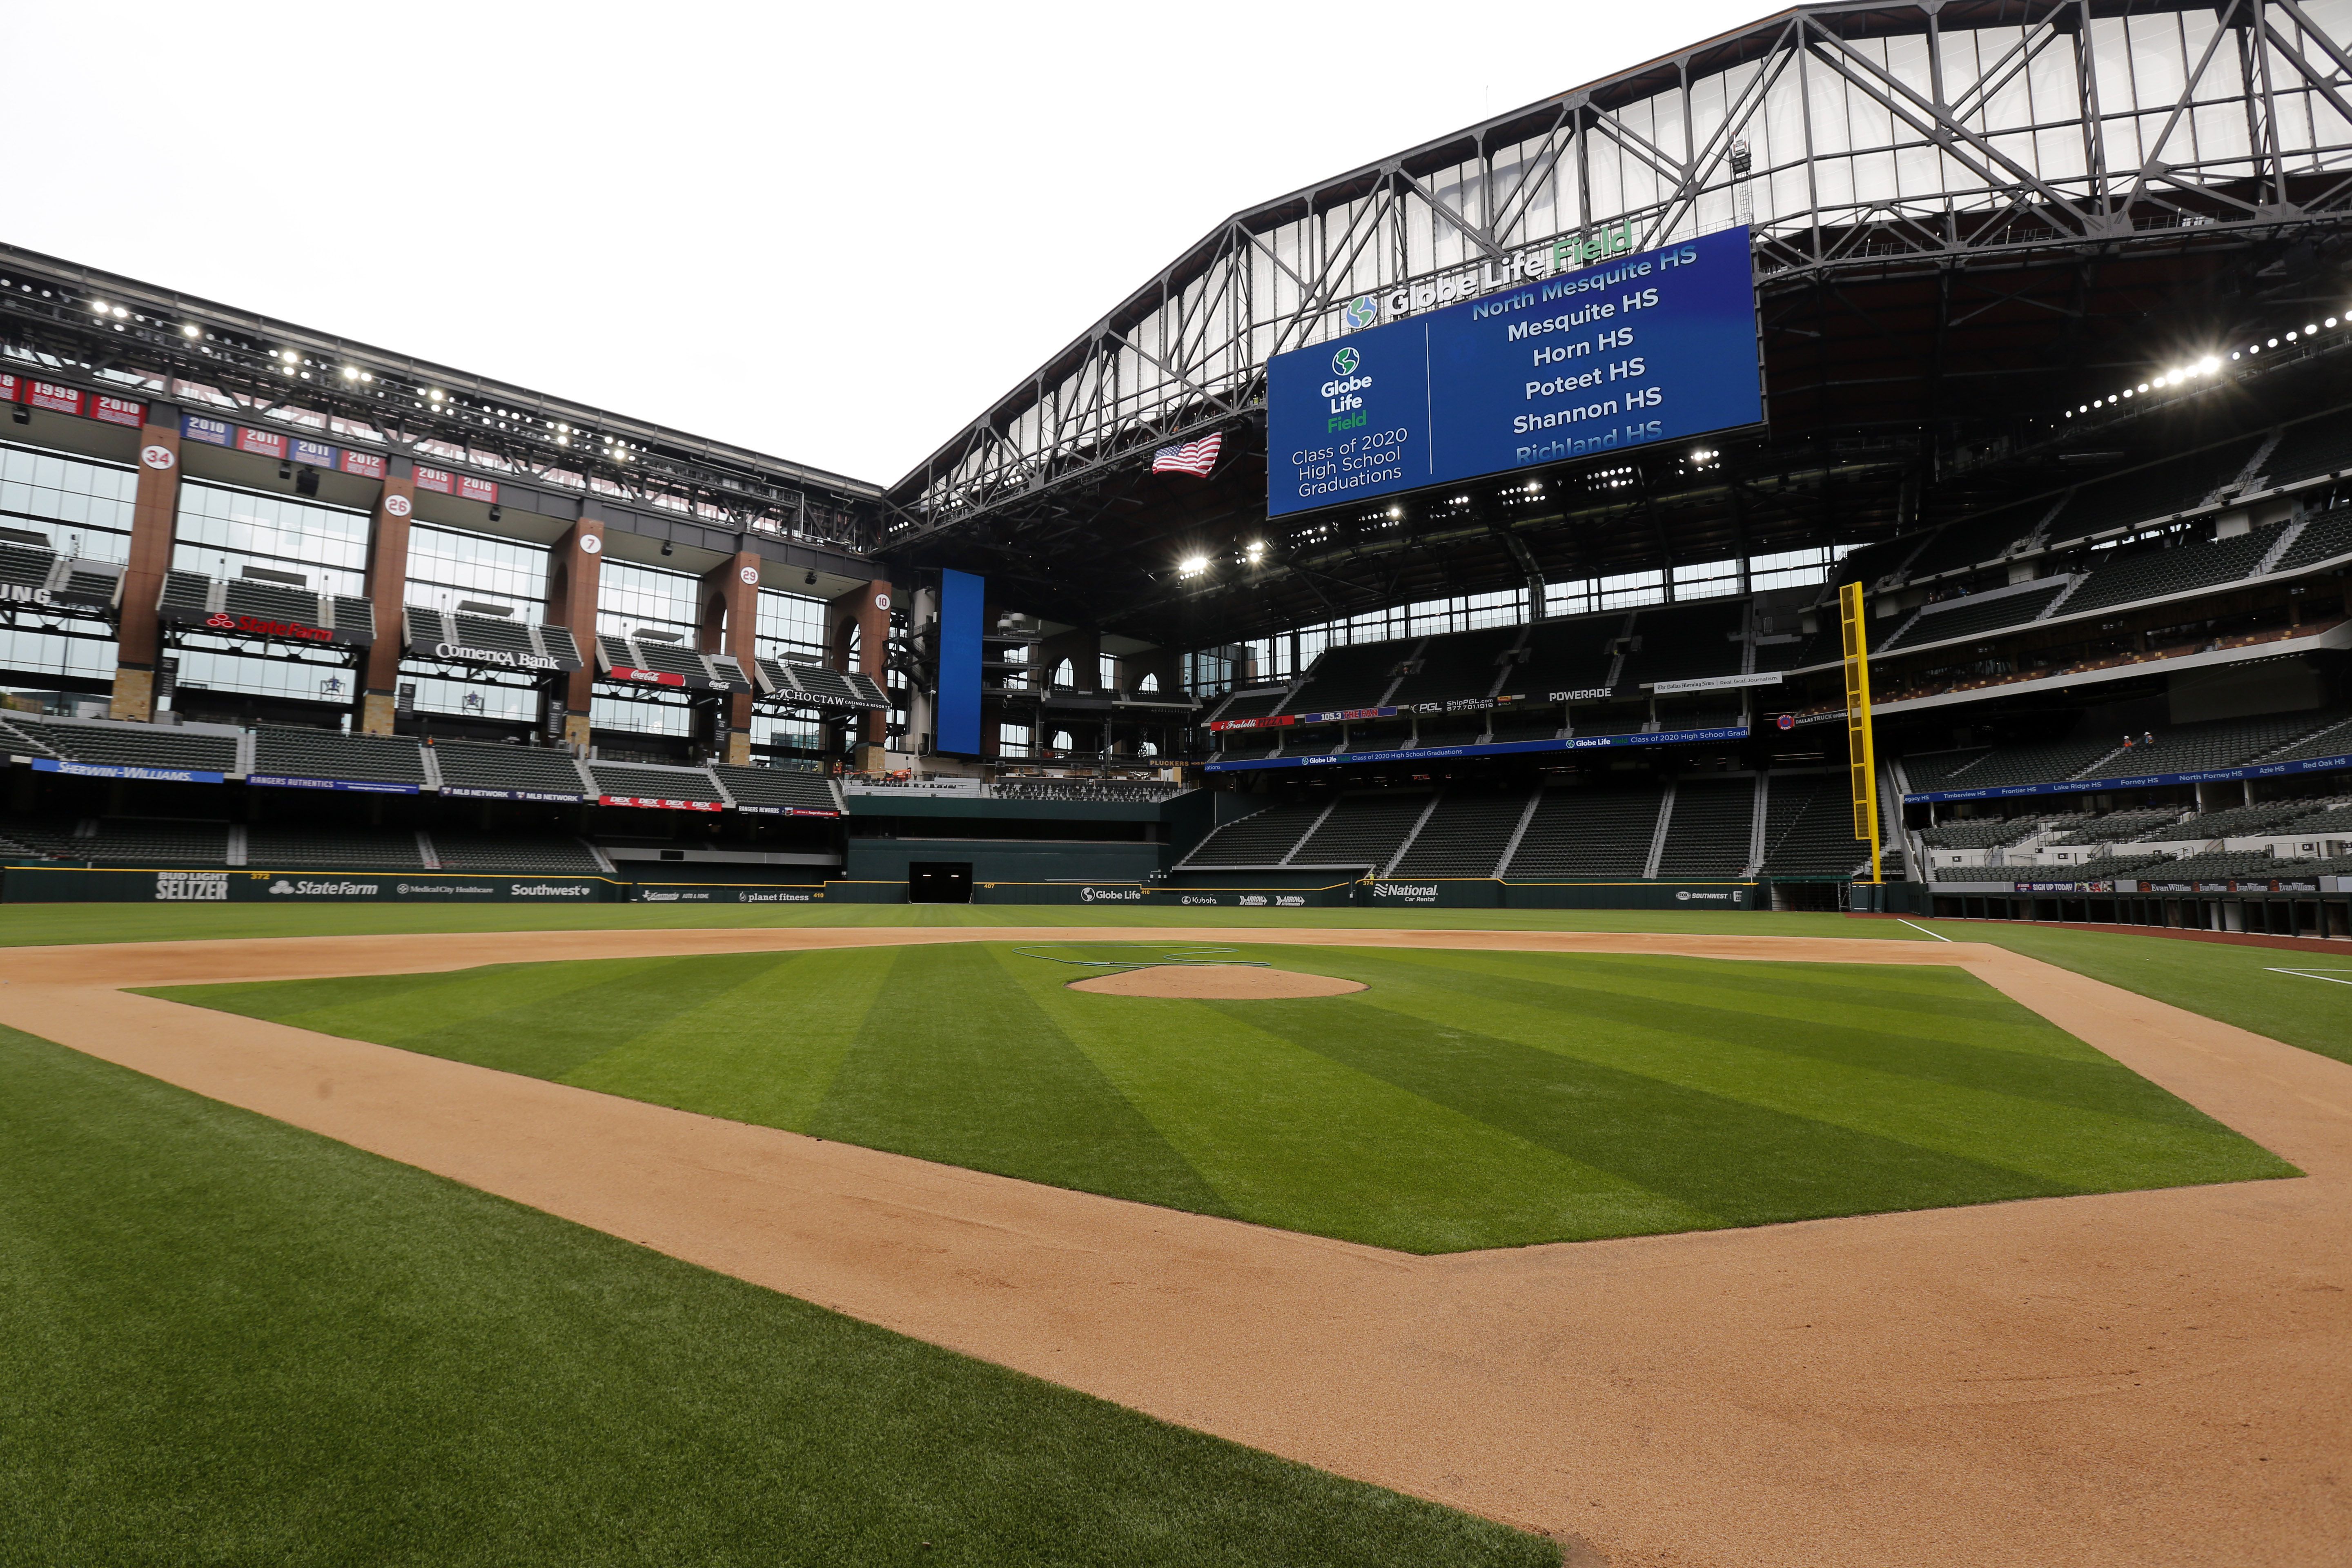 Texas Rangers games are still on hold, but Globe Life Field's